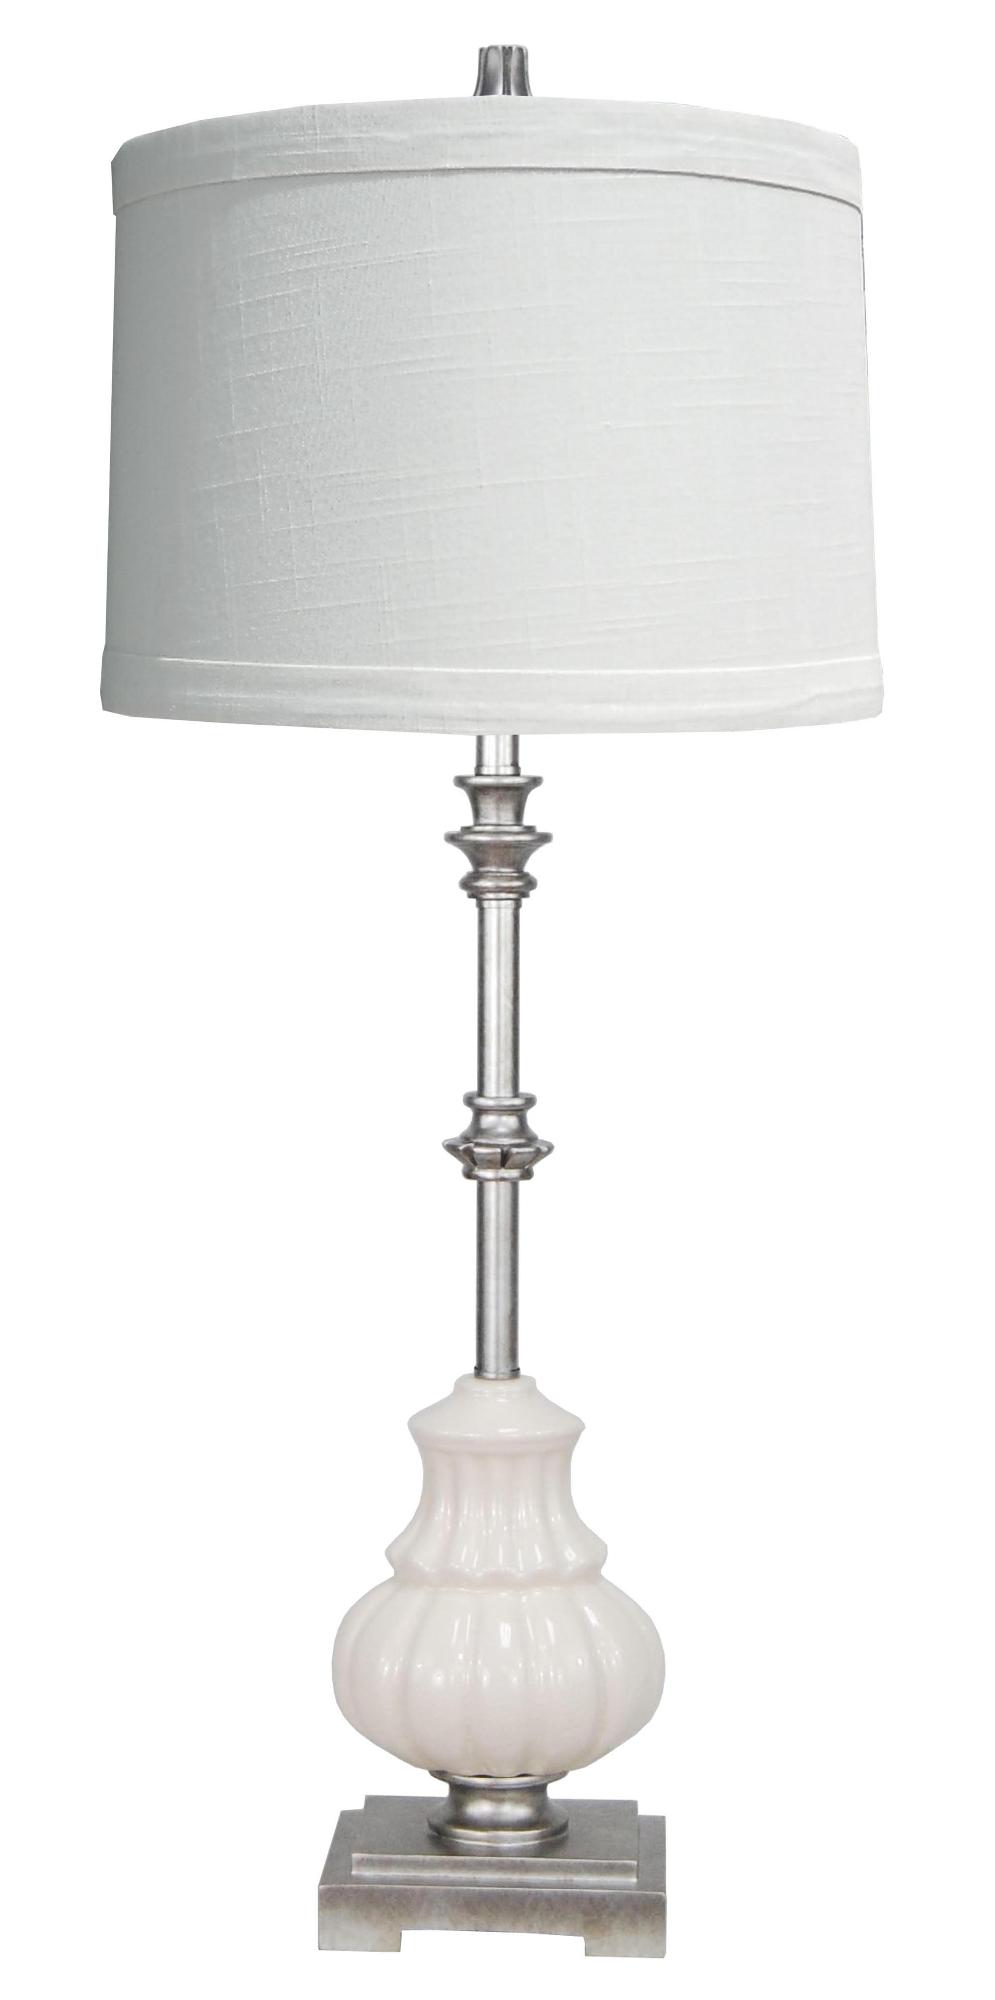 32" Ceramic & Poly Buffet Lamp with White Finish.